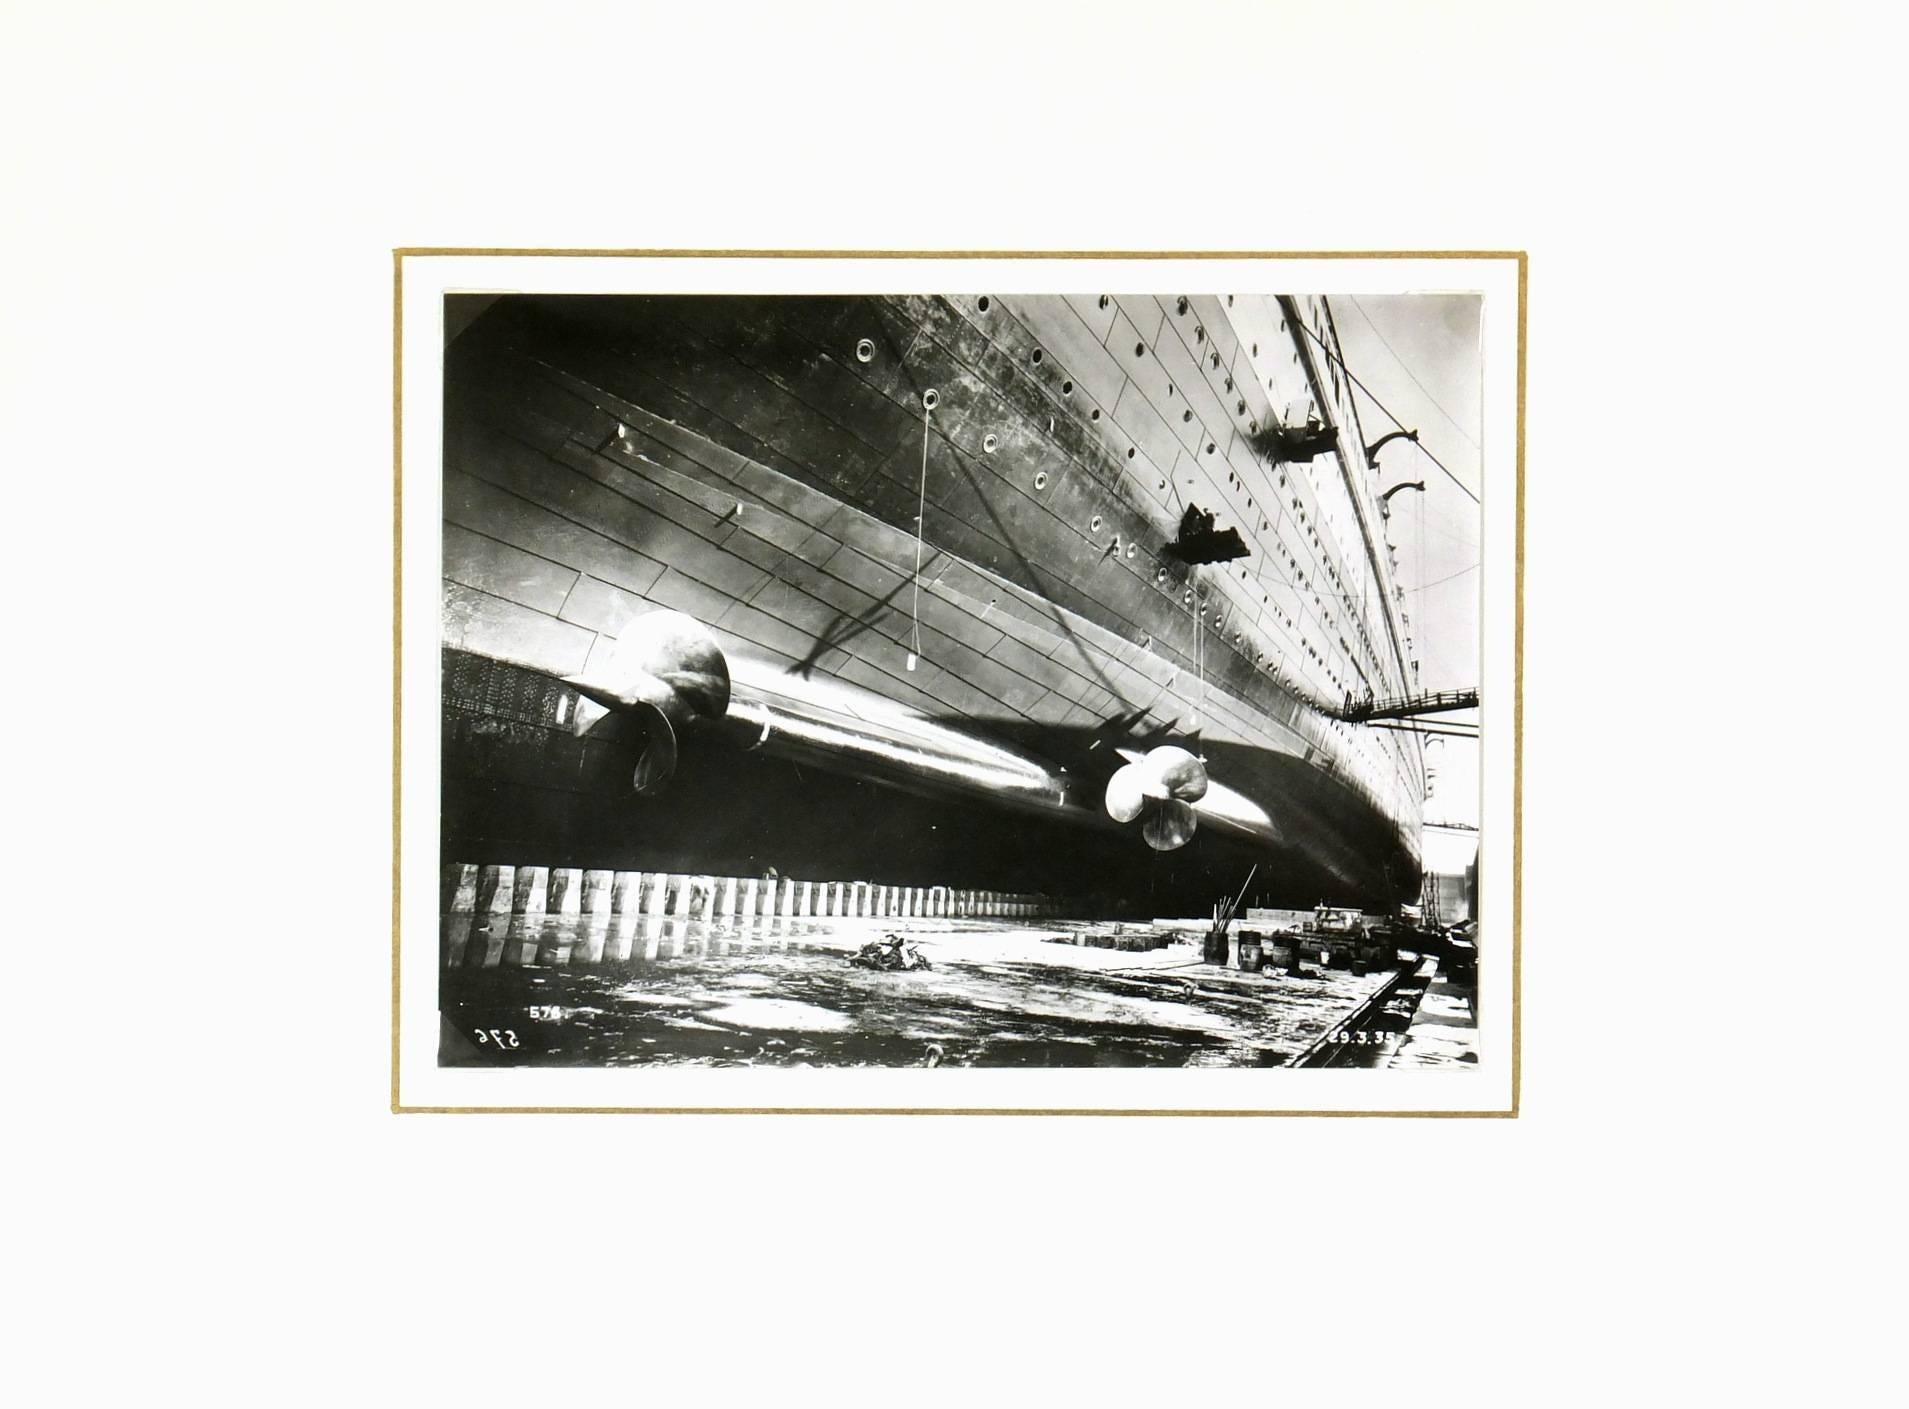 Fabulous industrial French black and white photograph of the luxury steamer "Le Normandie" in 1935. 

Original one-of-a-kind artwork on paper displayed on a white mat with a gold border. Mat fits a standard-size frame. Archival plastic